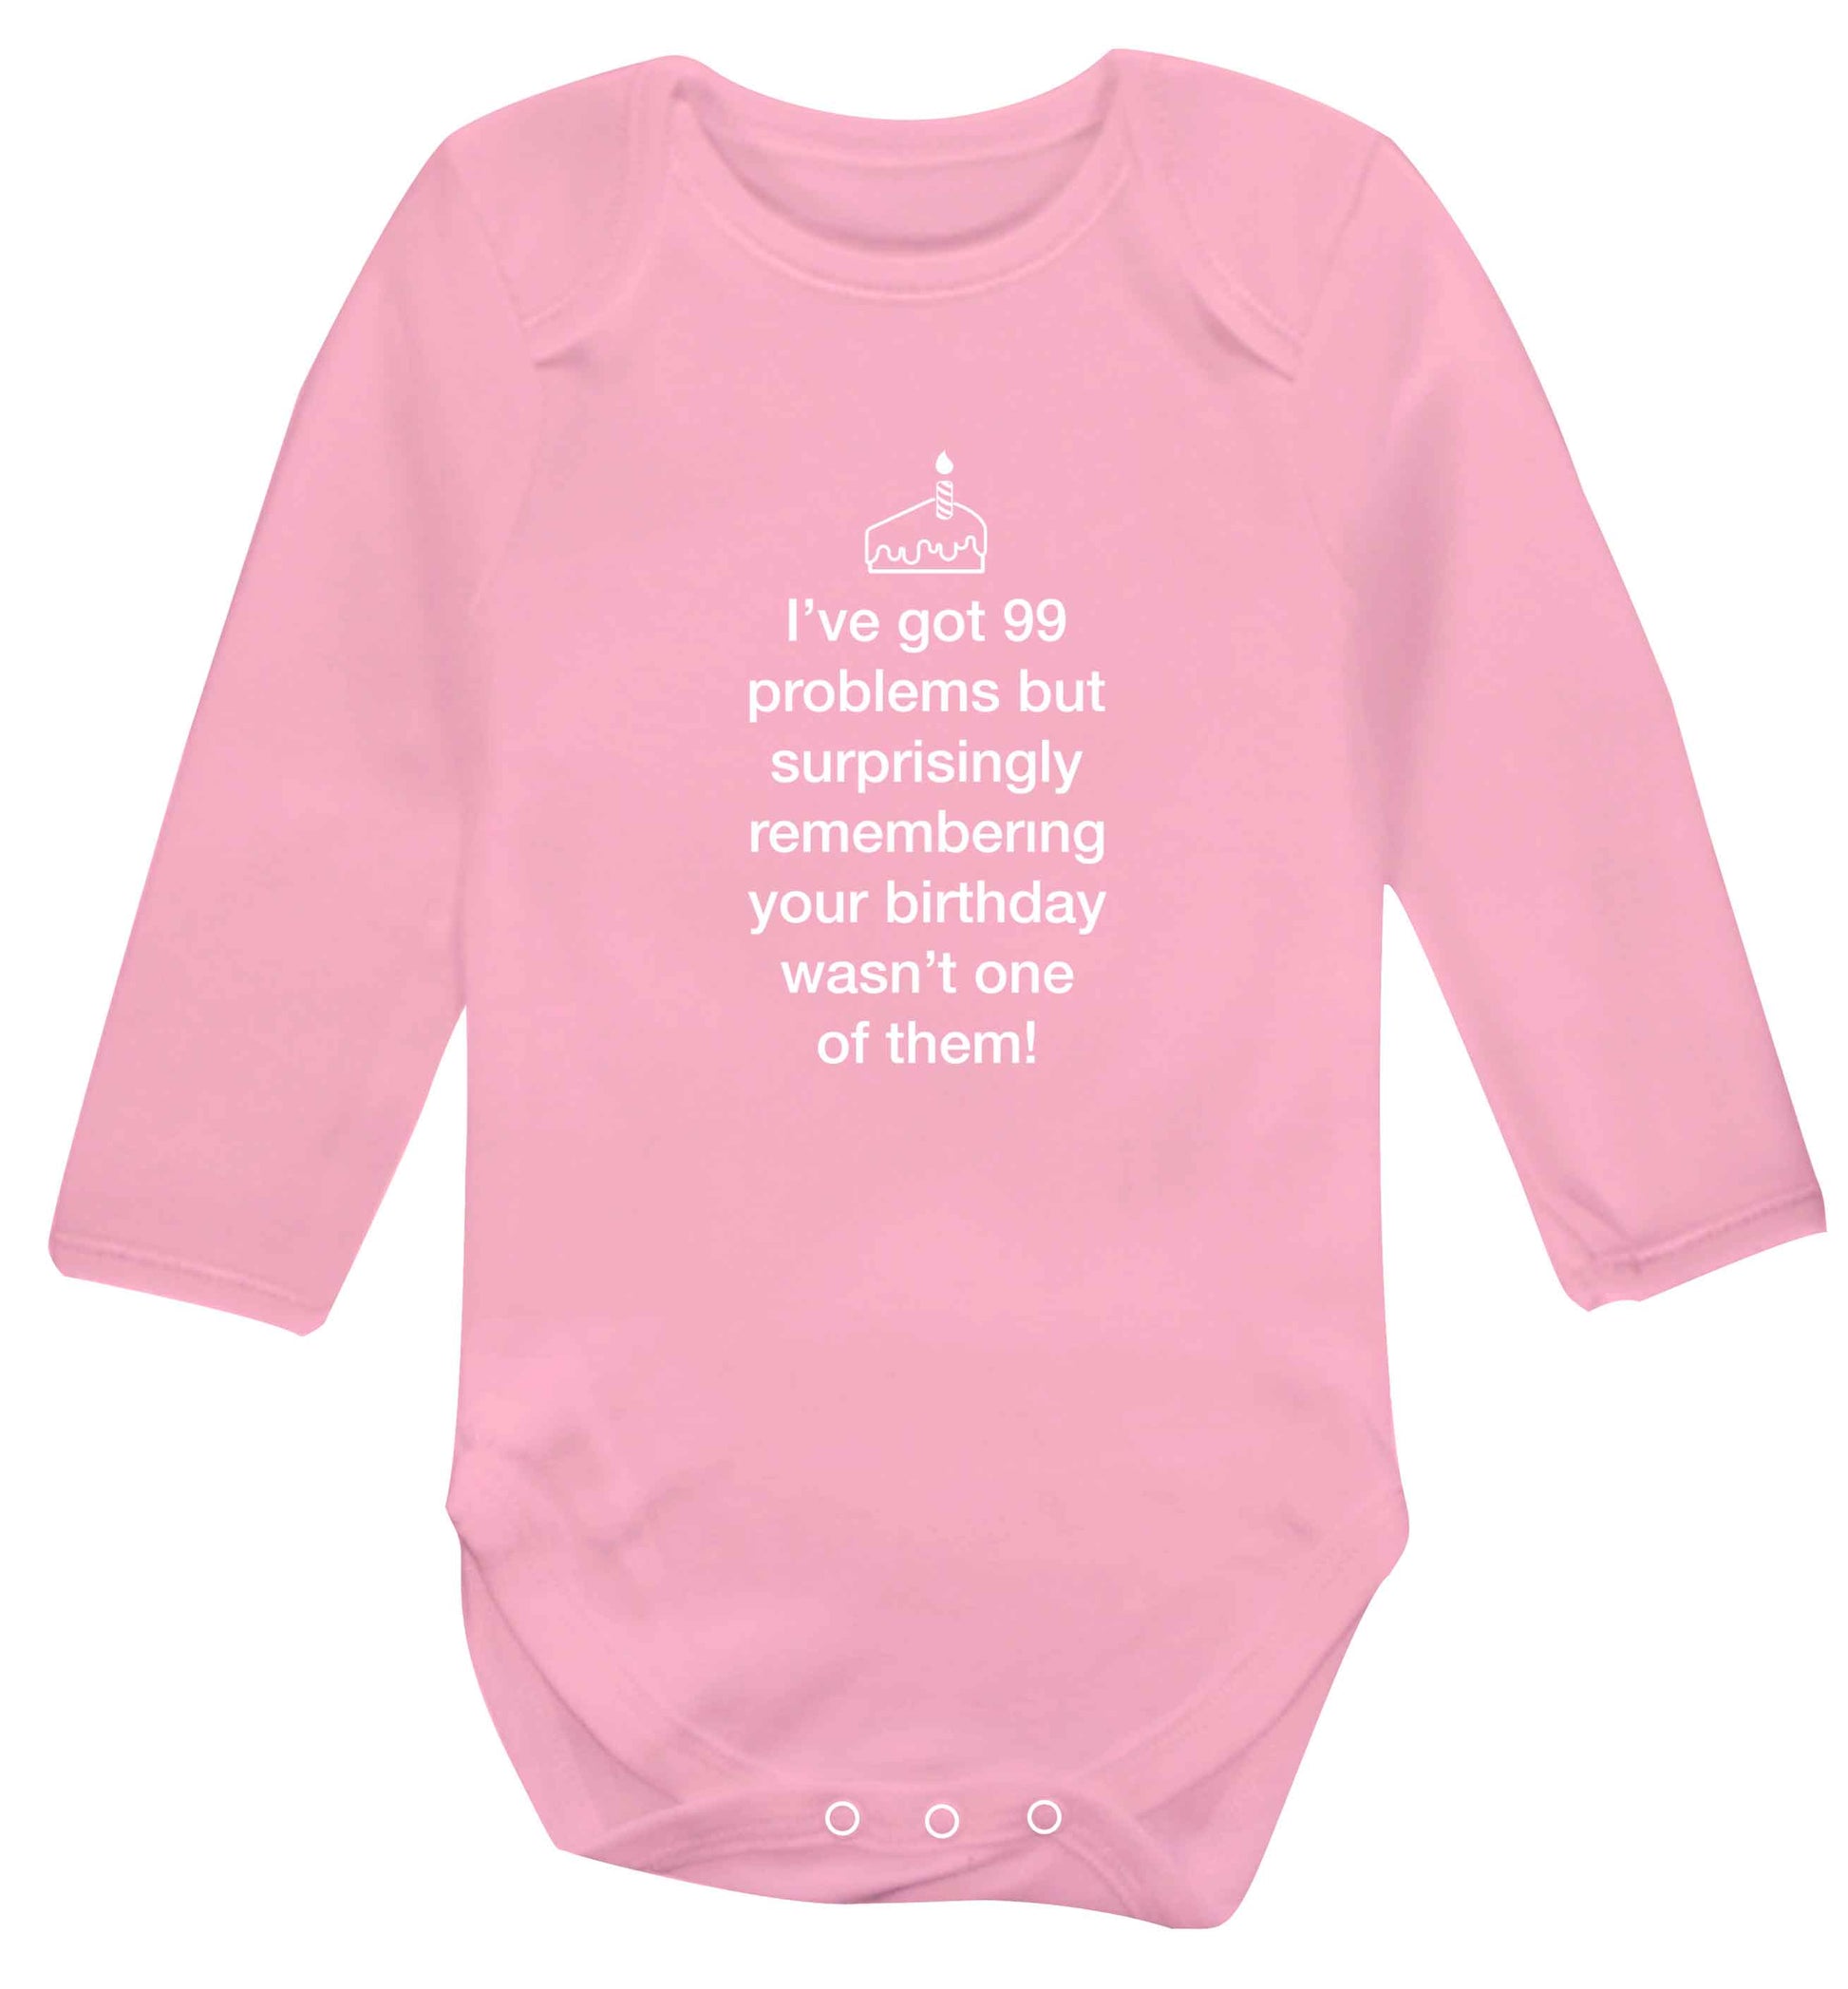 I've got 99 problems but surprisingly remembering your birthday wasn't one of them! baby vest long sleeved pale pink 6-12 months